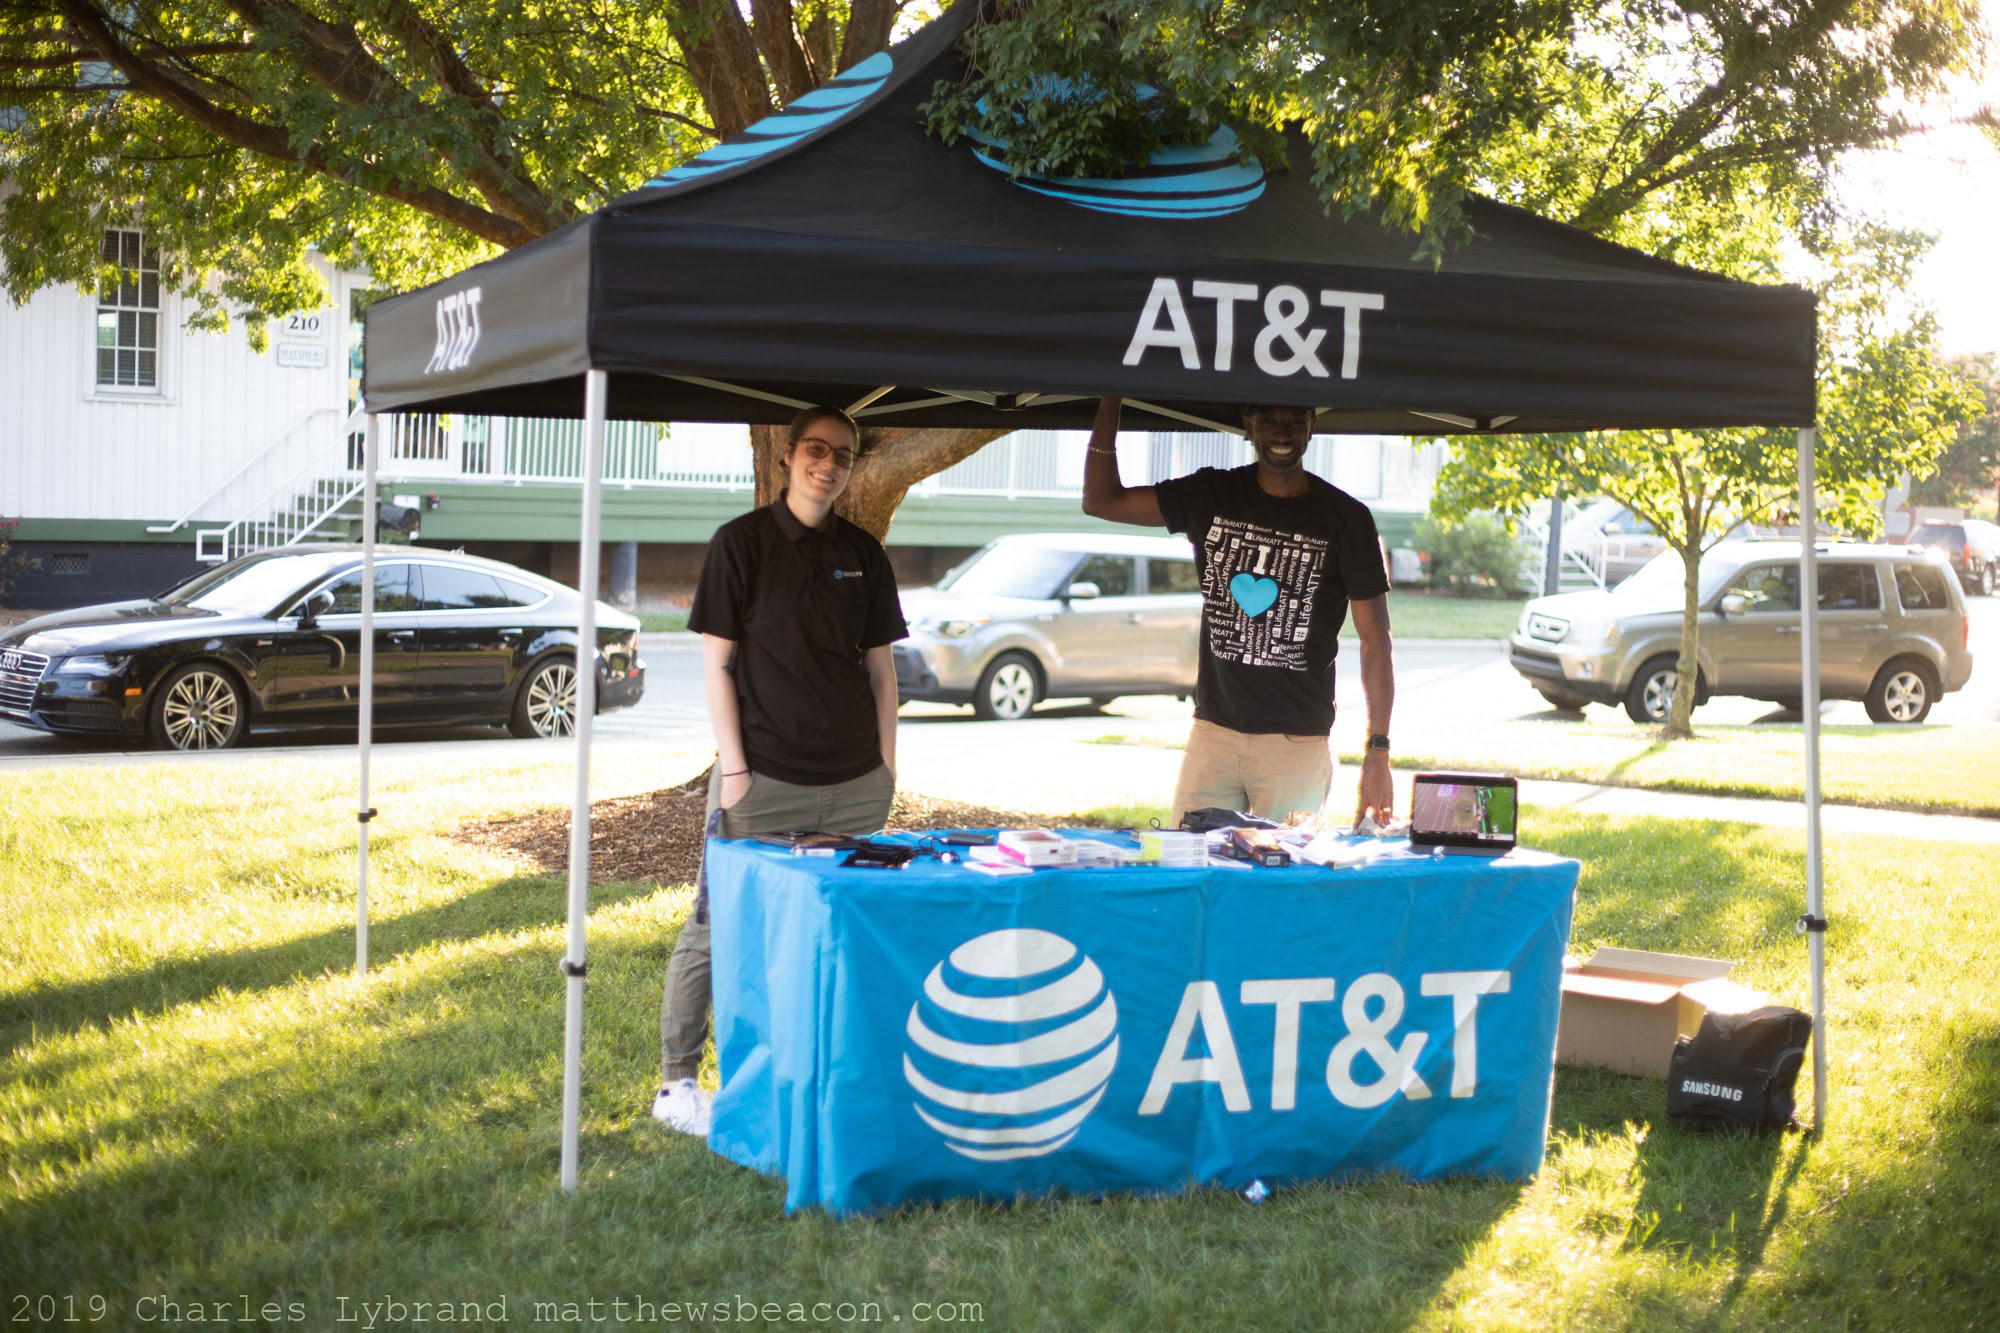 beacon national night out  at&t.jpg